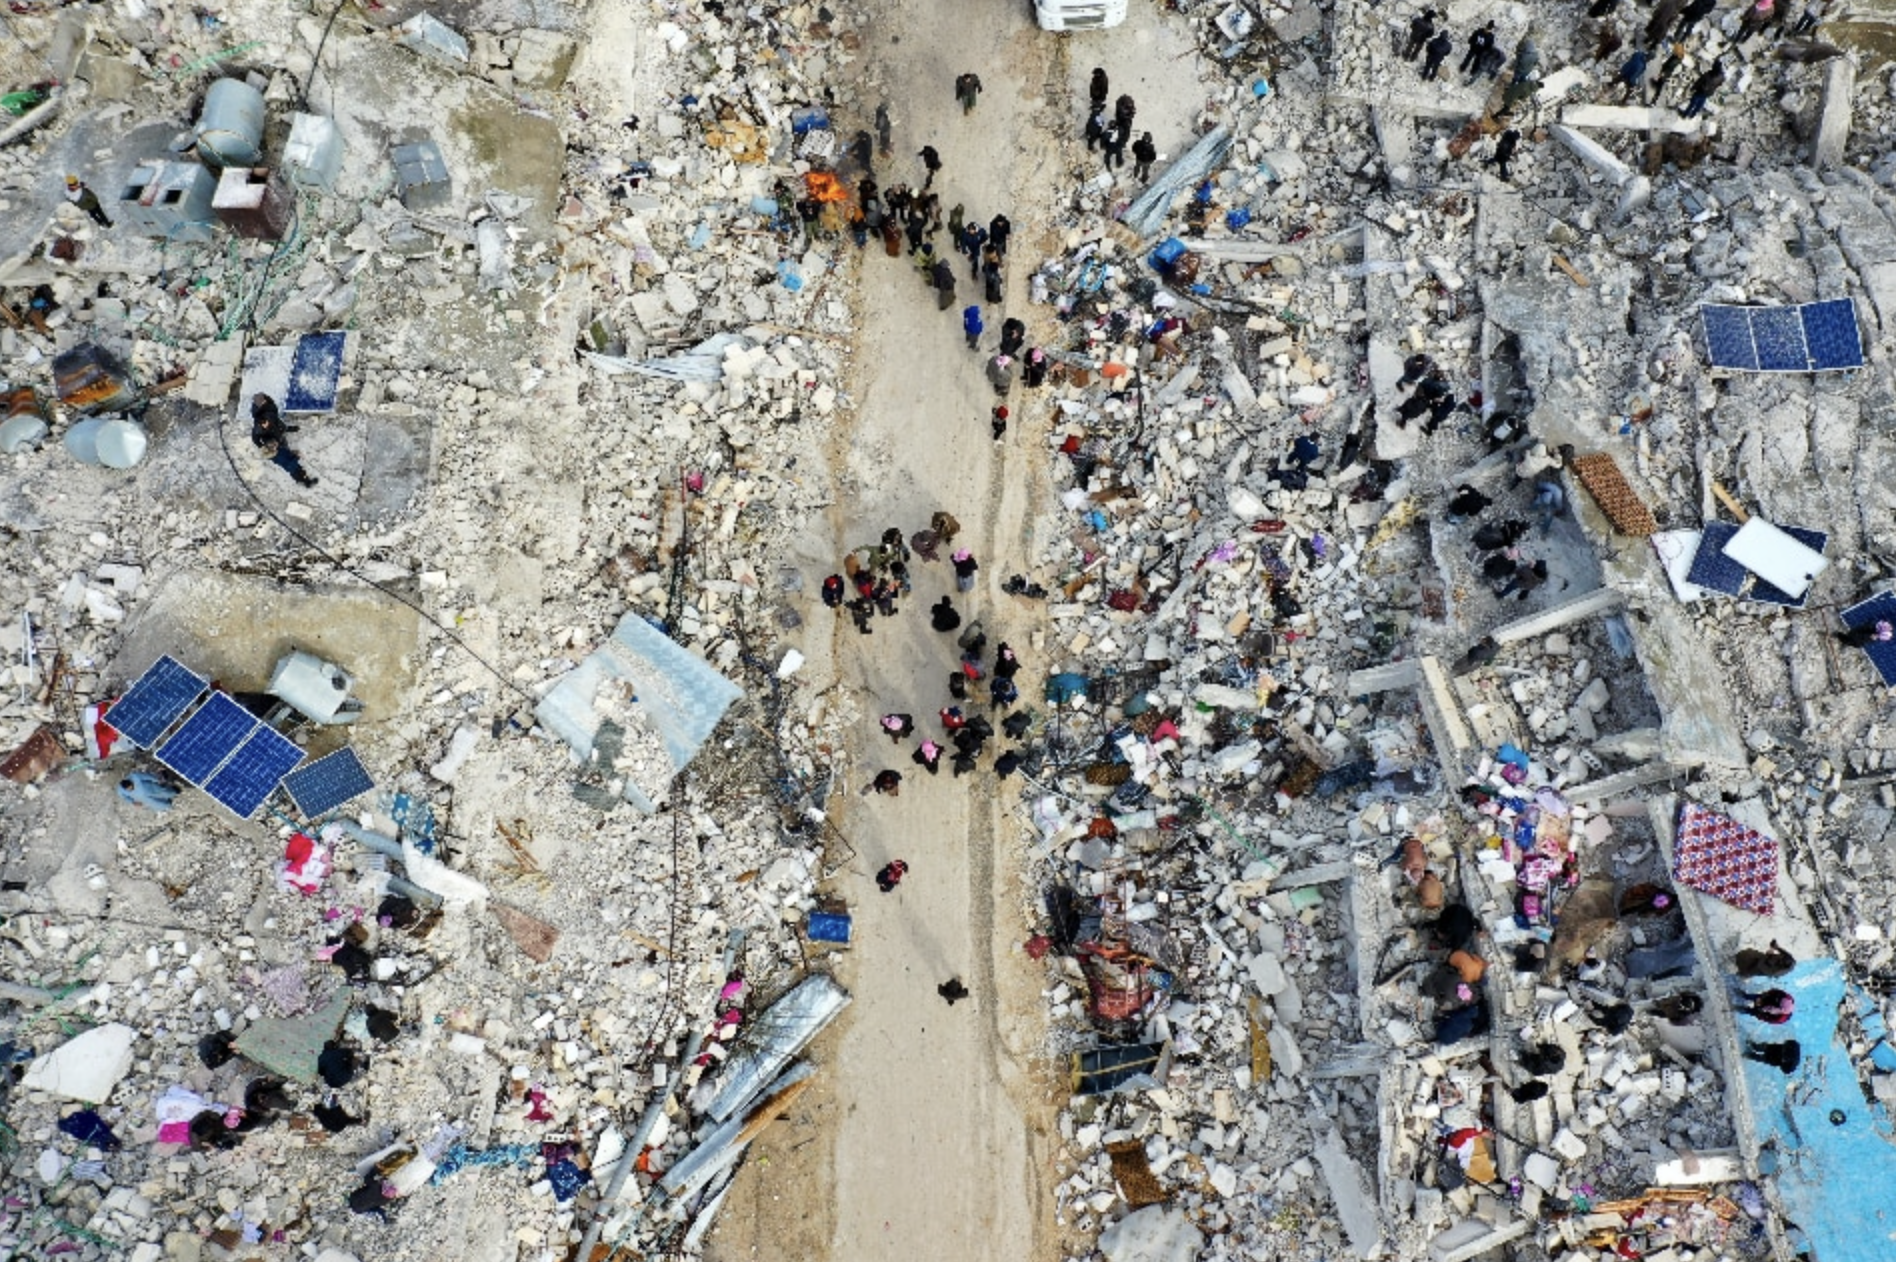 This aerial view shows residents searching for victims and survivors amidst the rubble of collapsed buildings following an earthquake in the village of Besnia near the twon of Harim, in Syria's rebel-held northhwestern Idlib